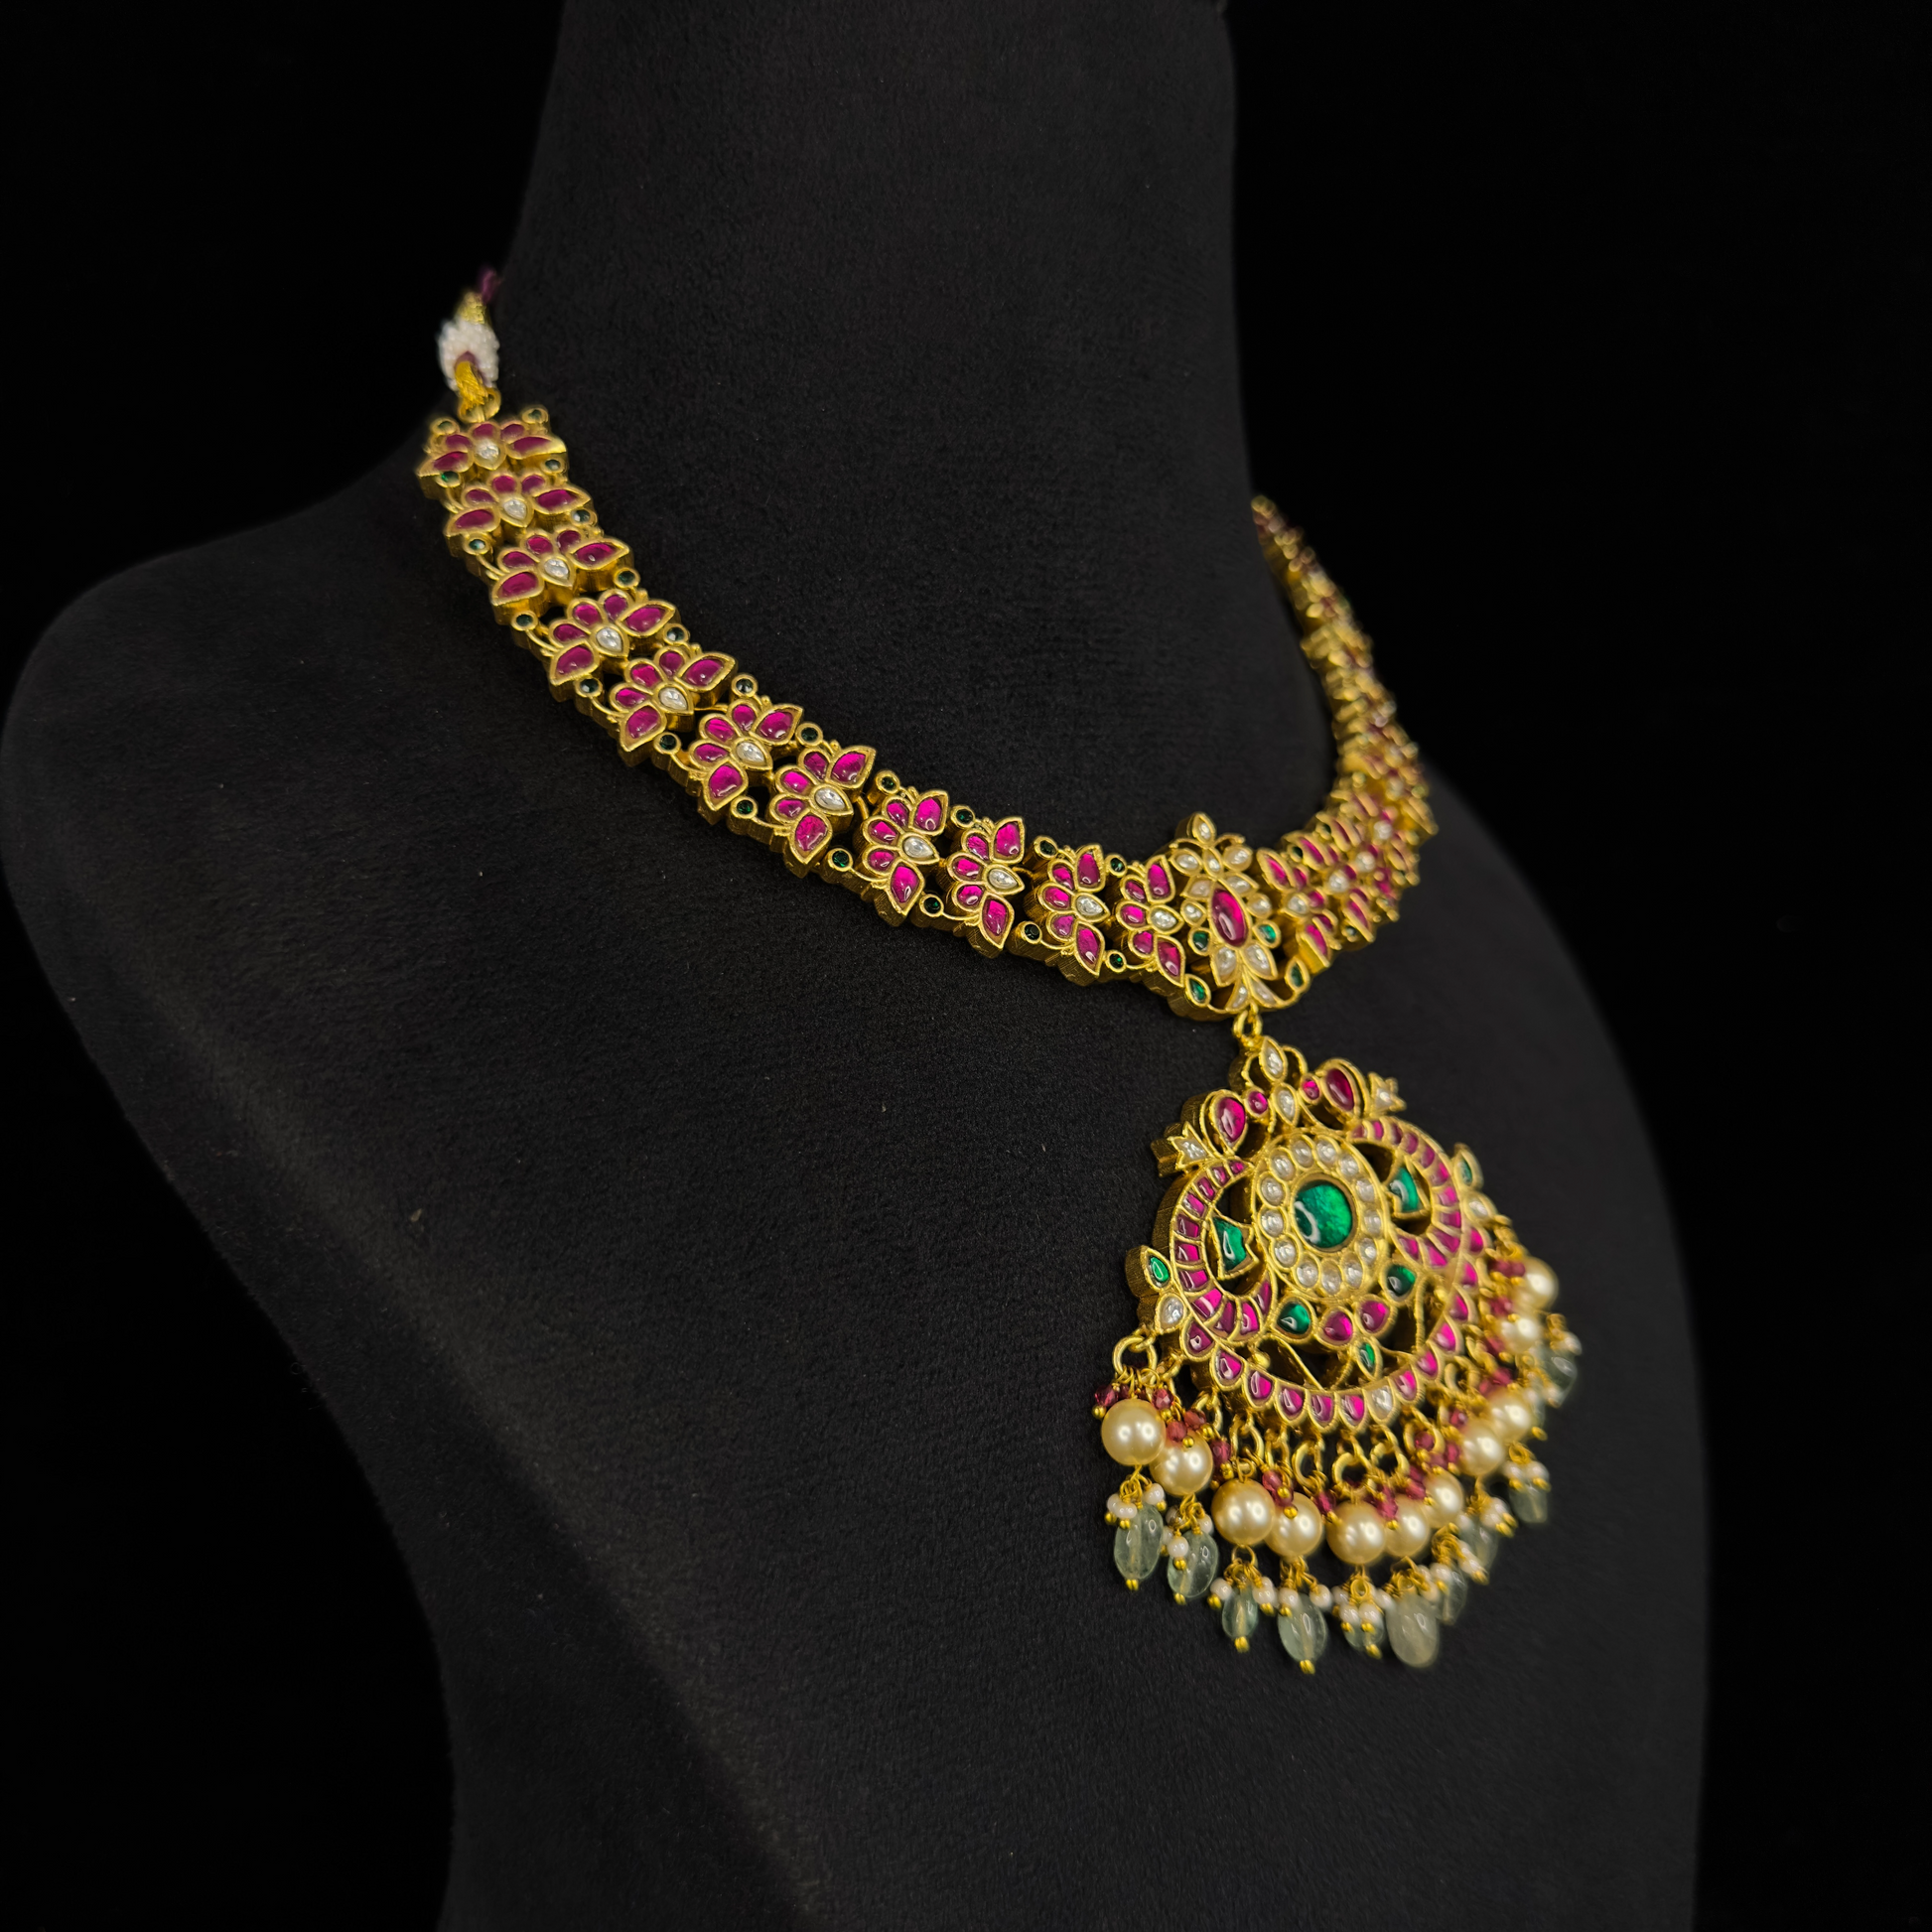 Ornate Splendor: Exquisite Jadau Kundan Necklace with Pearl Adornments with 22k gold plating This product belongs to jadau kundan jewellery category